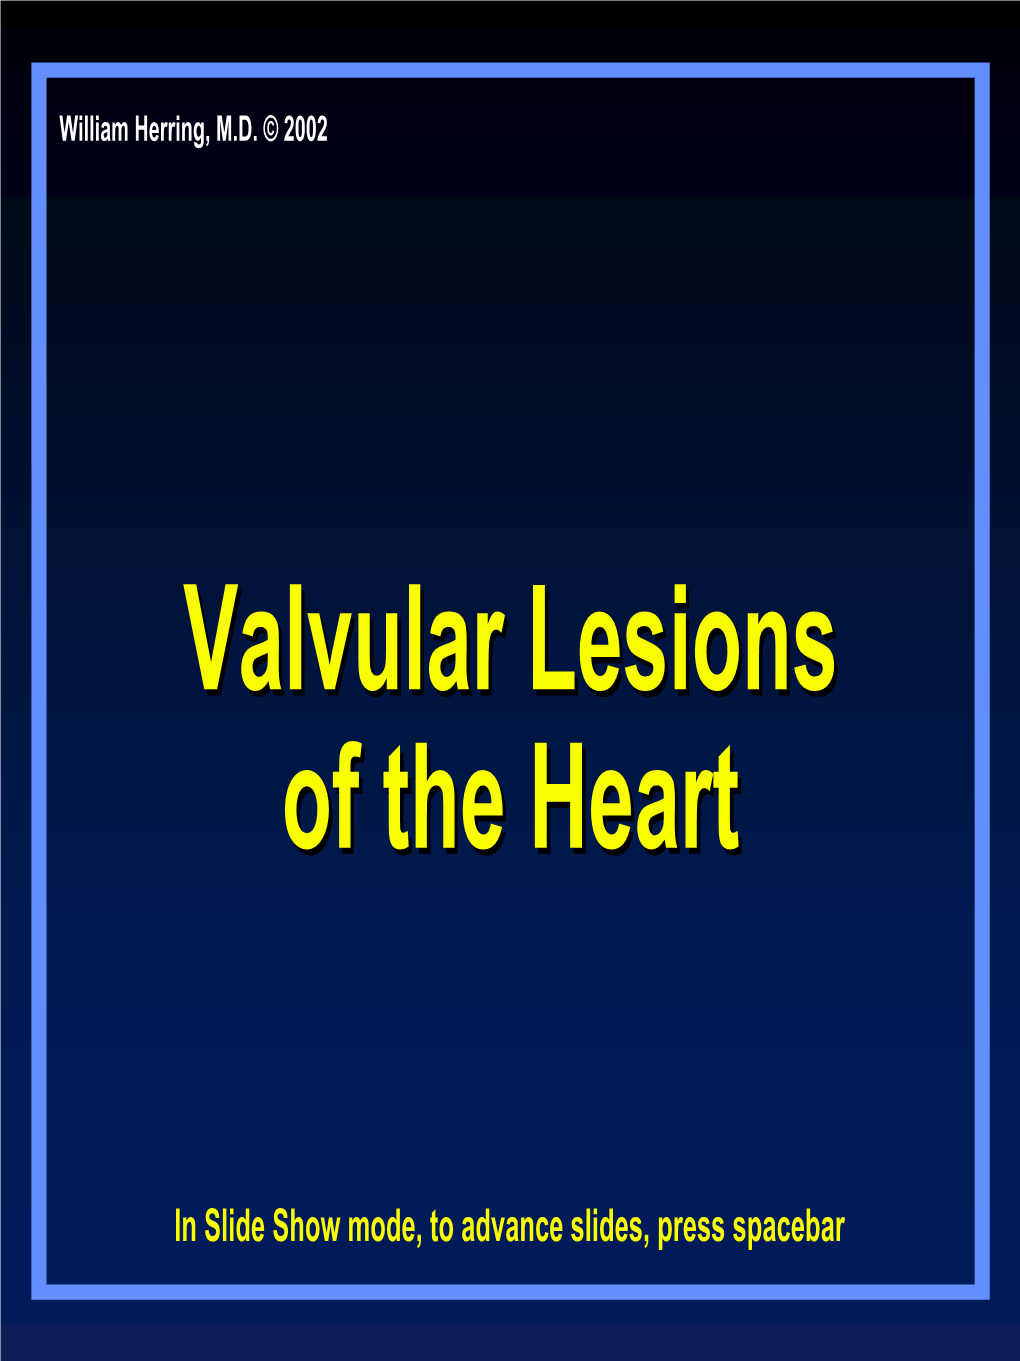 Valvular Lesions of the Heart